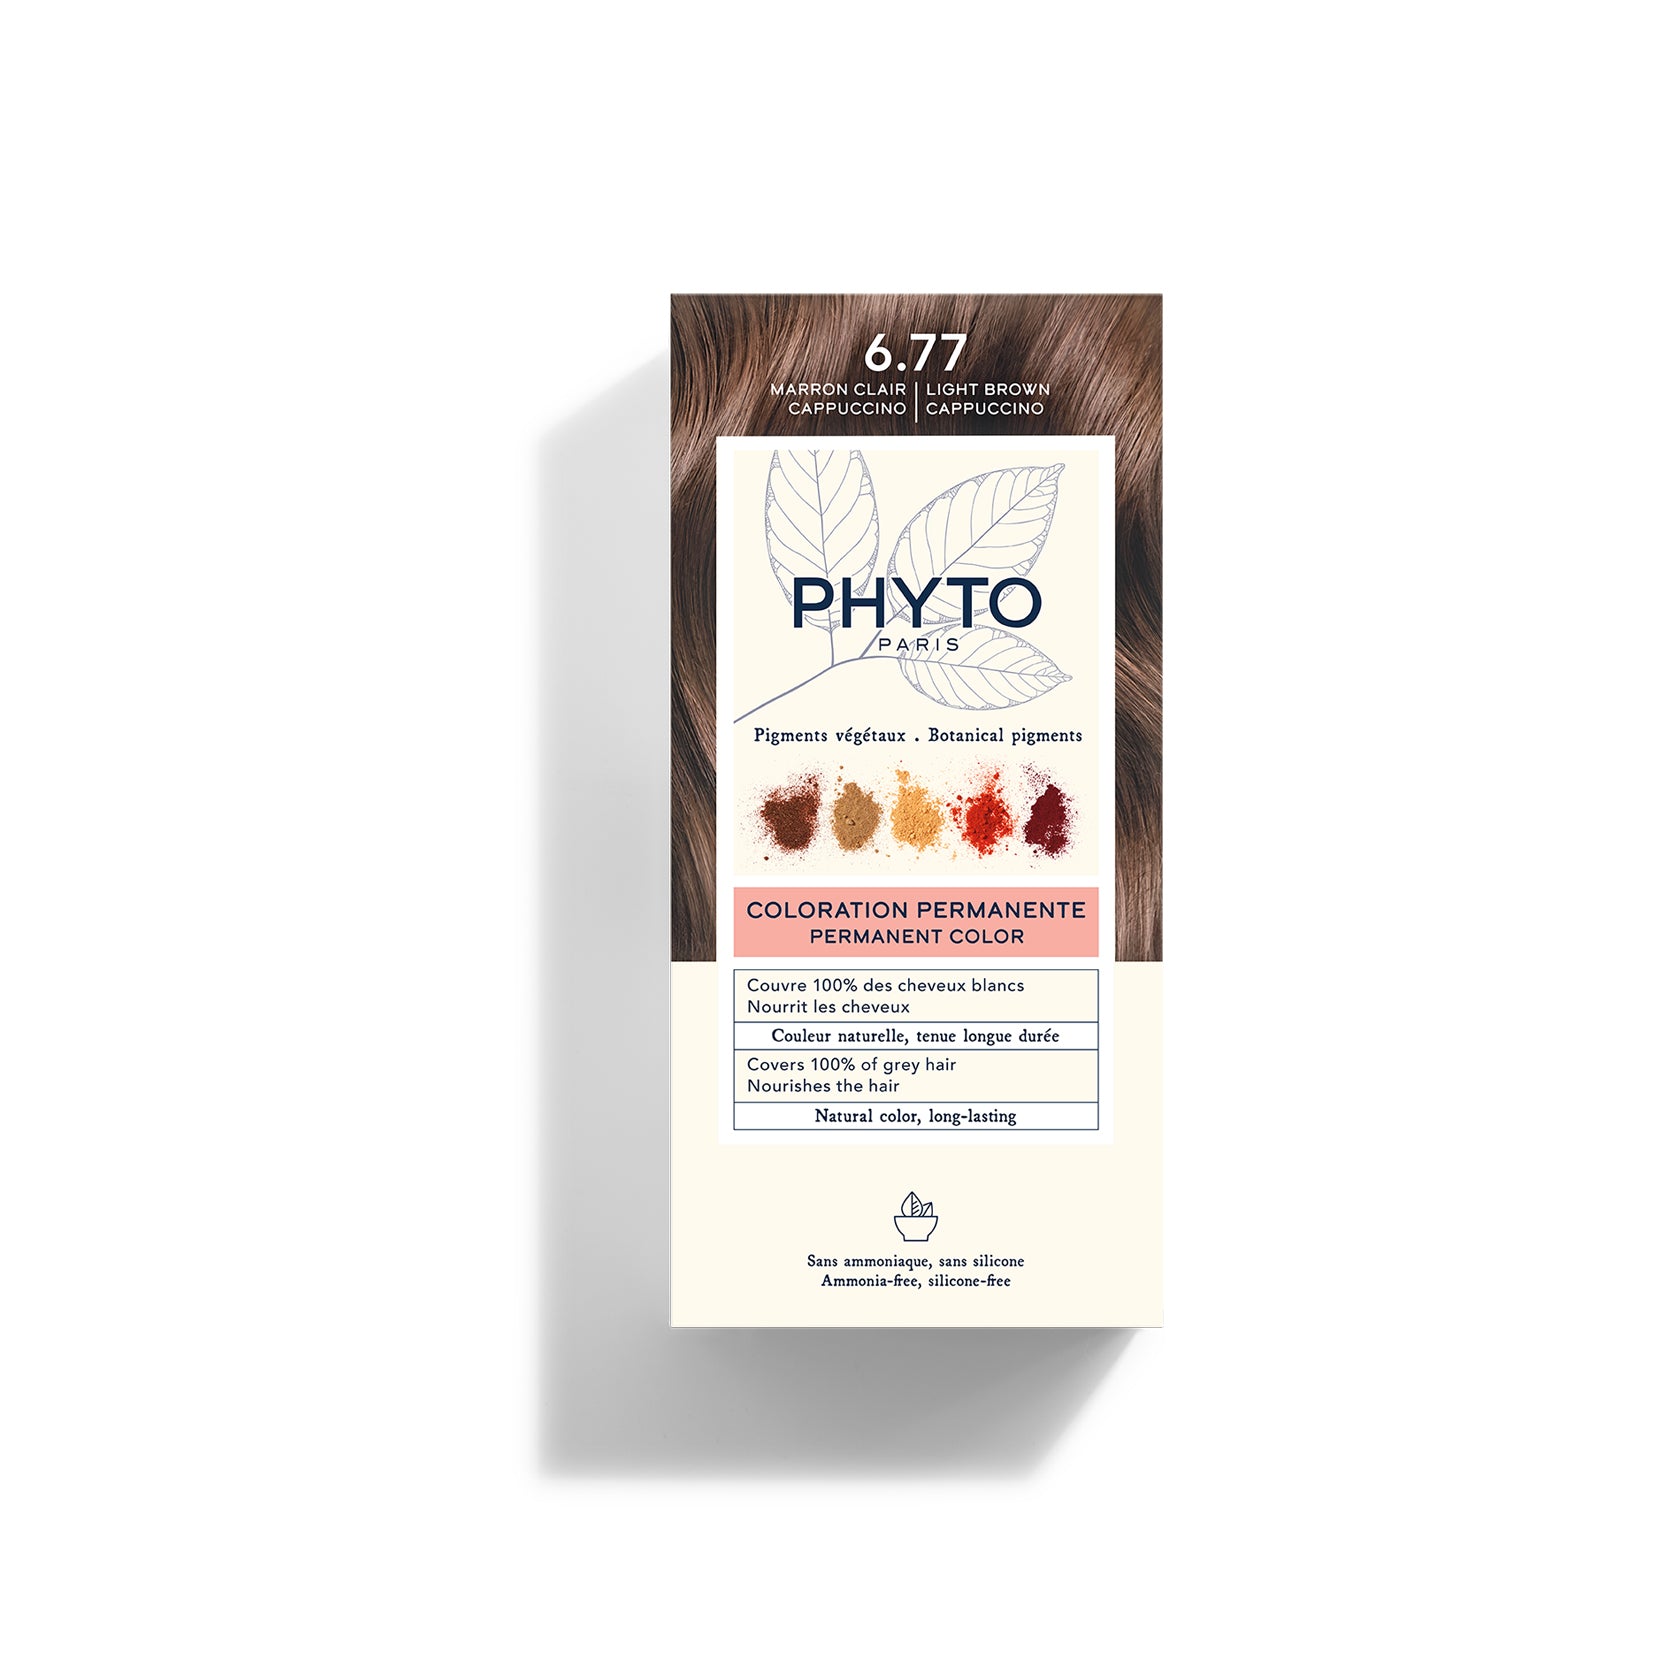 Phytocolor Permanent Color Shade 6.77 Light Brown Cappuccino